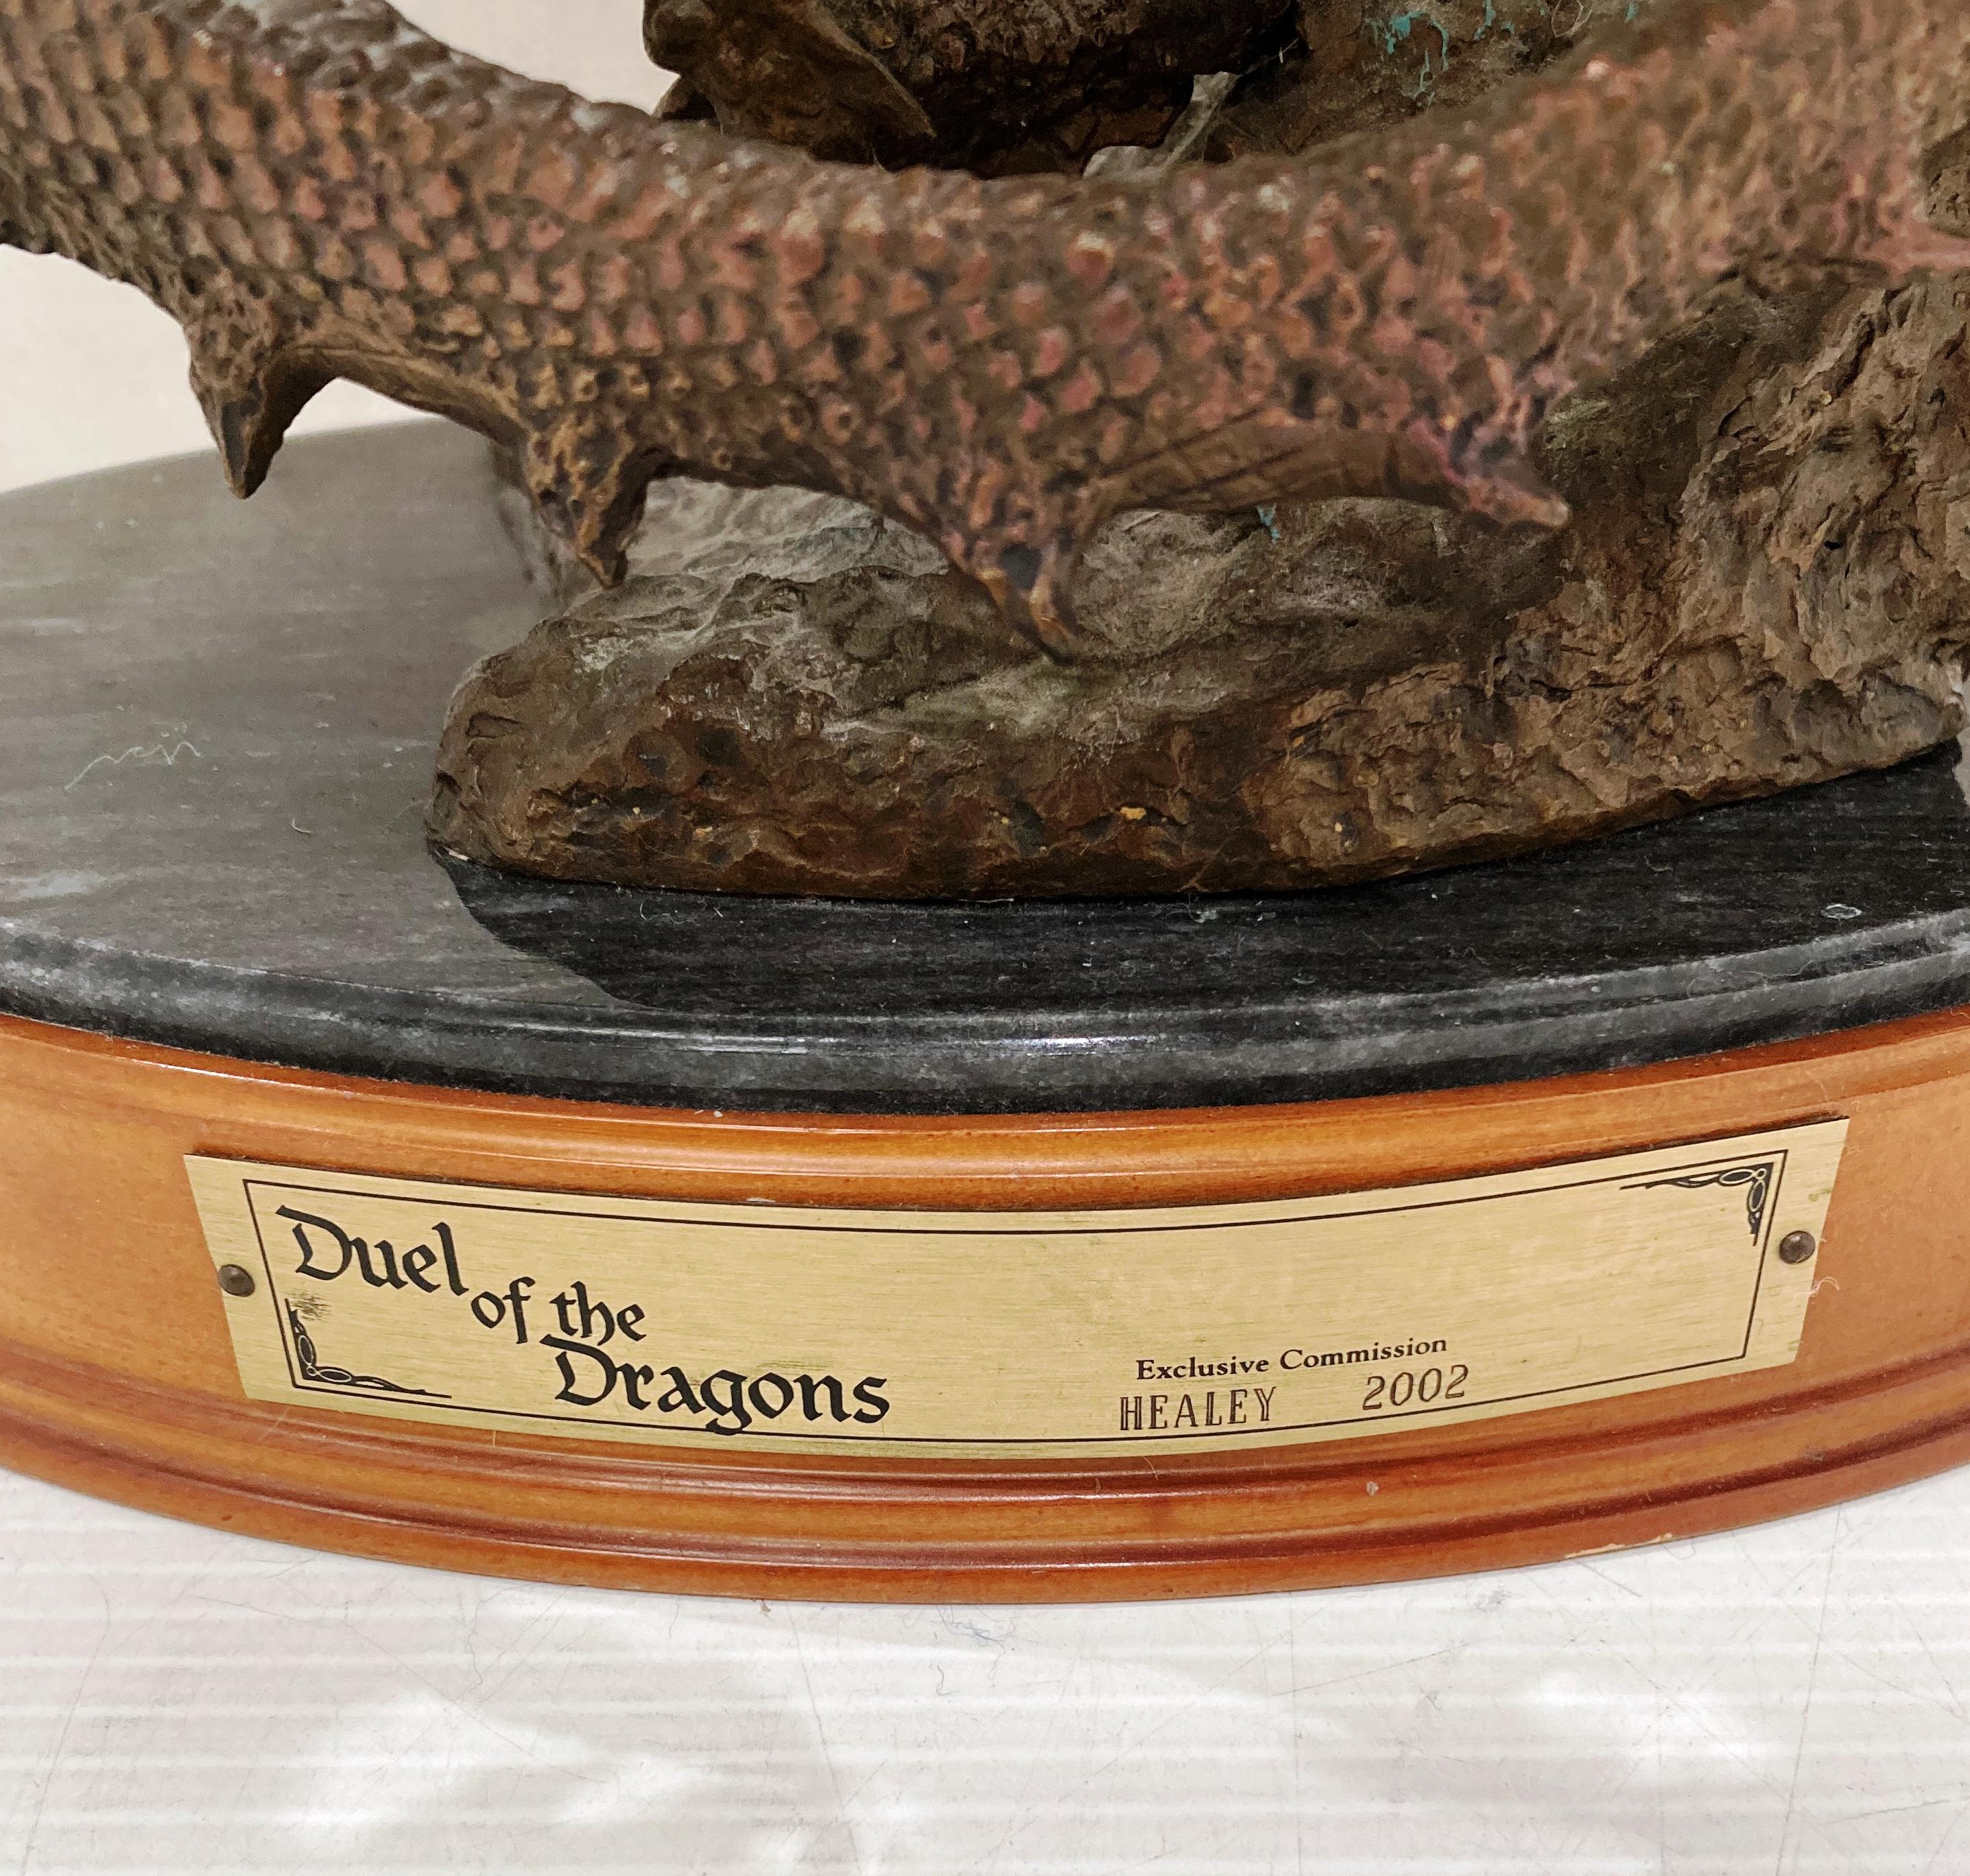 'Duel of the Dragons' exclusive commission Healey 2002 The Franklin Mint bronze statue, - Image 2 of 5